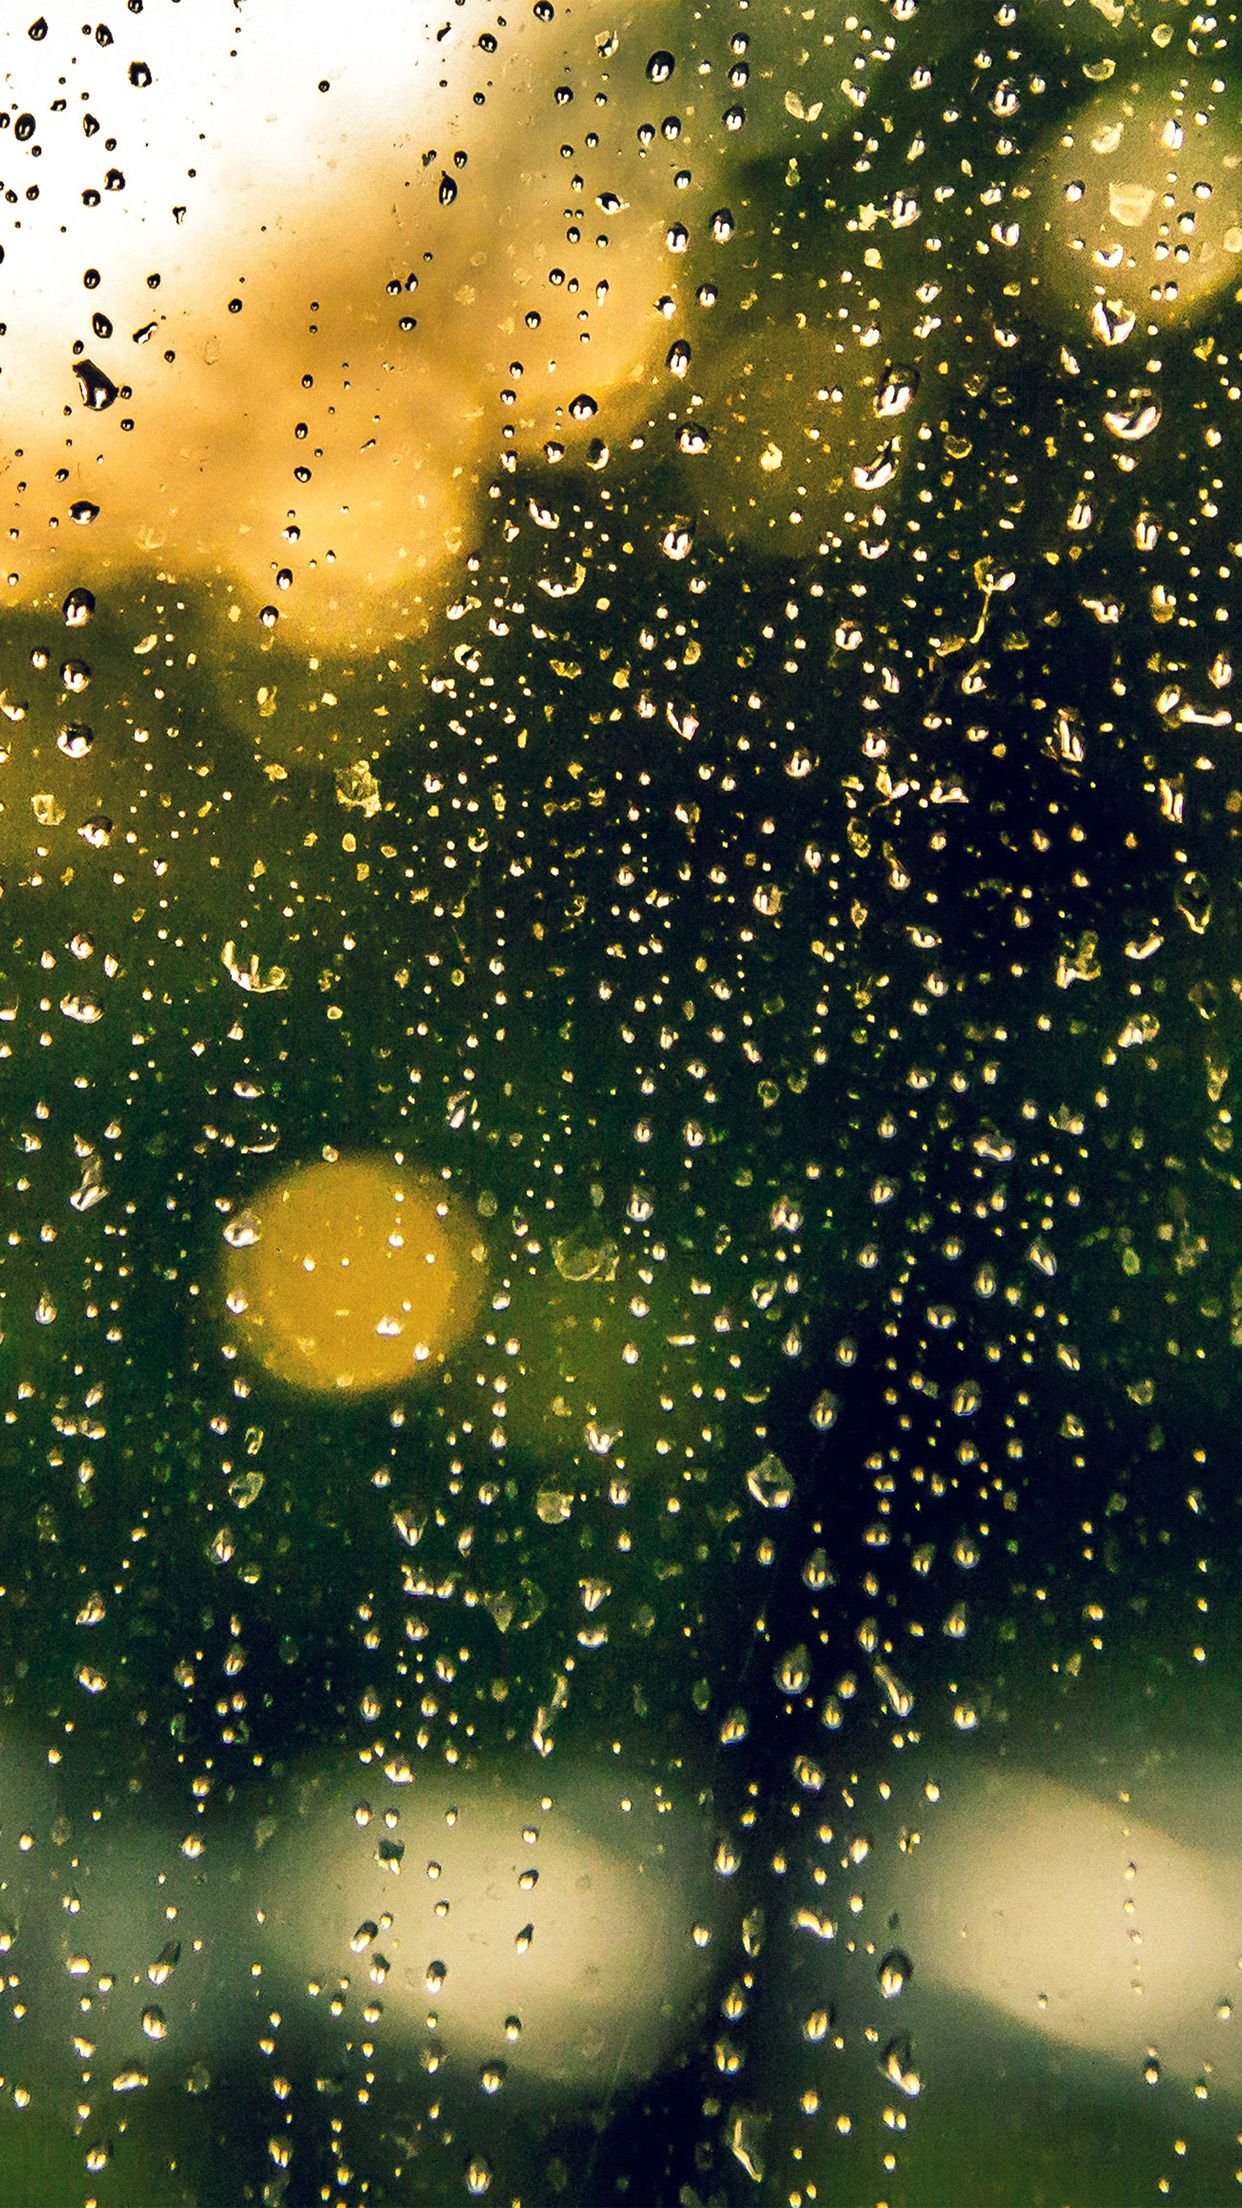 Rain window green nature Download Free HD Wallpaper for iPhone 6s, 8